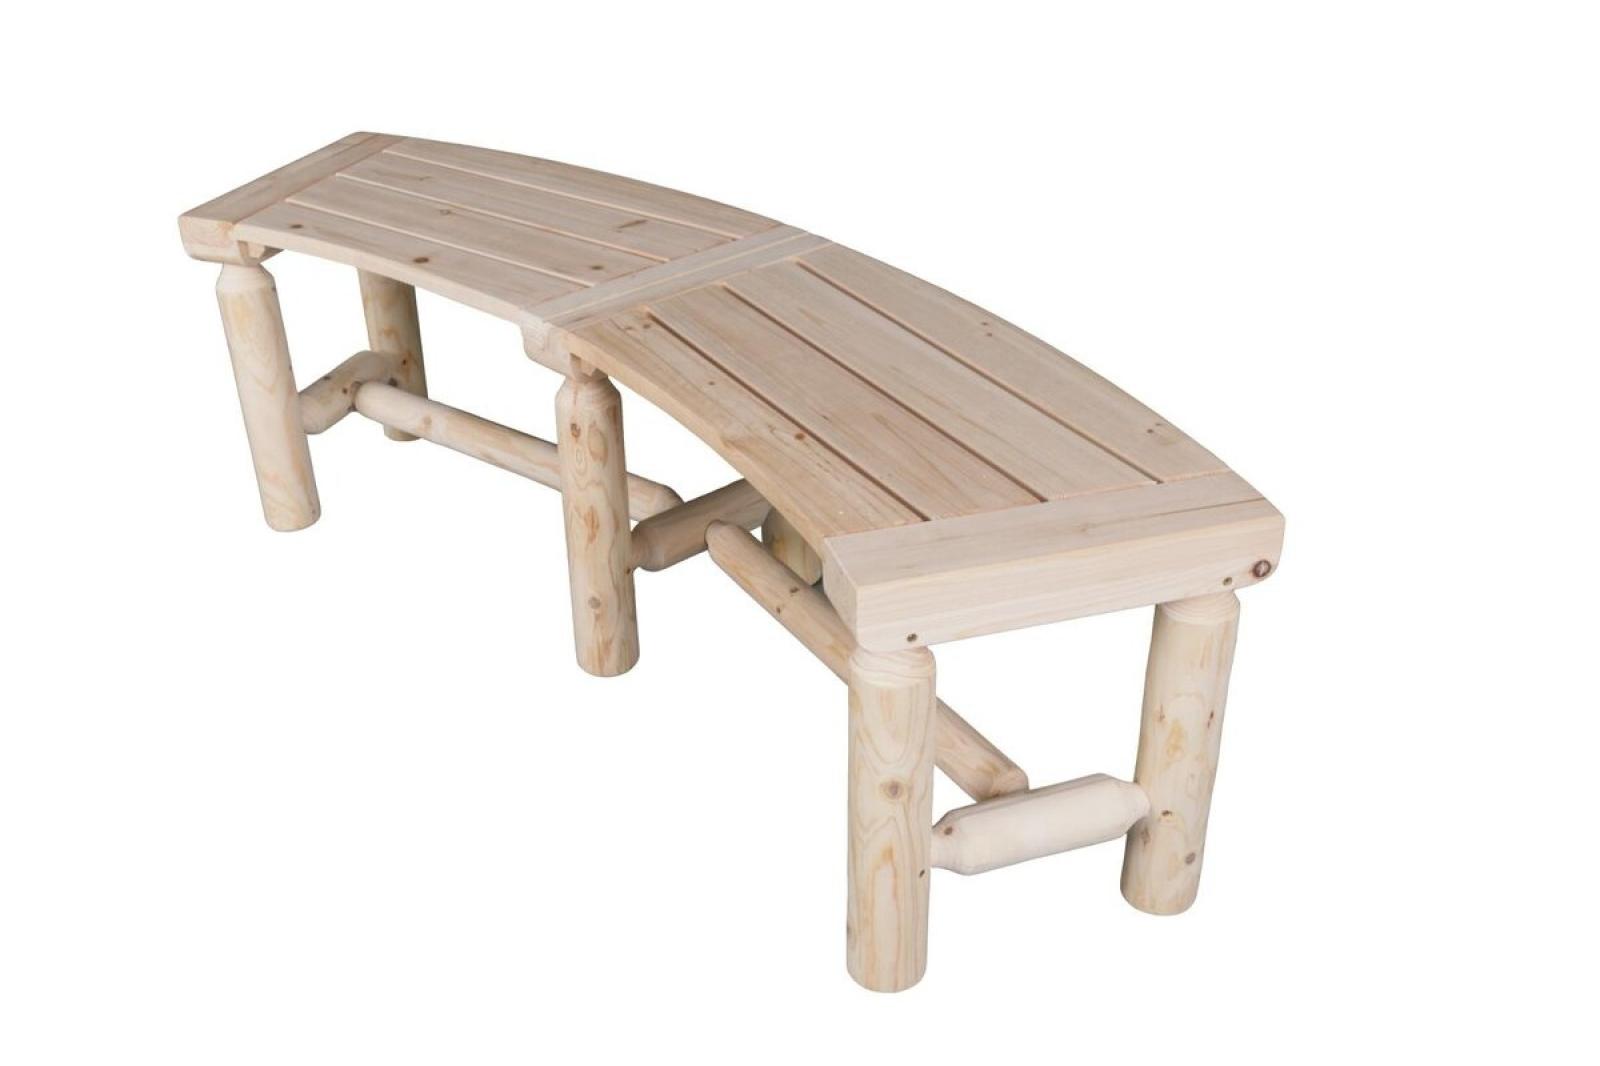 Backyard Expressions Curved Wooden Bench